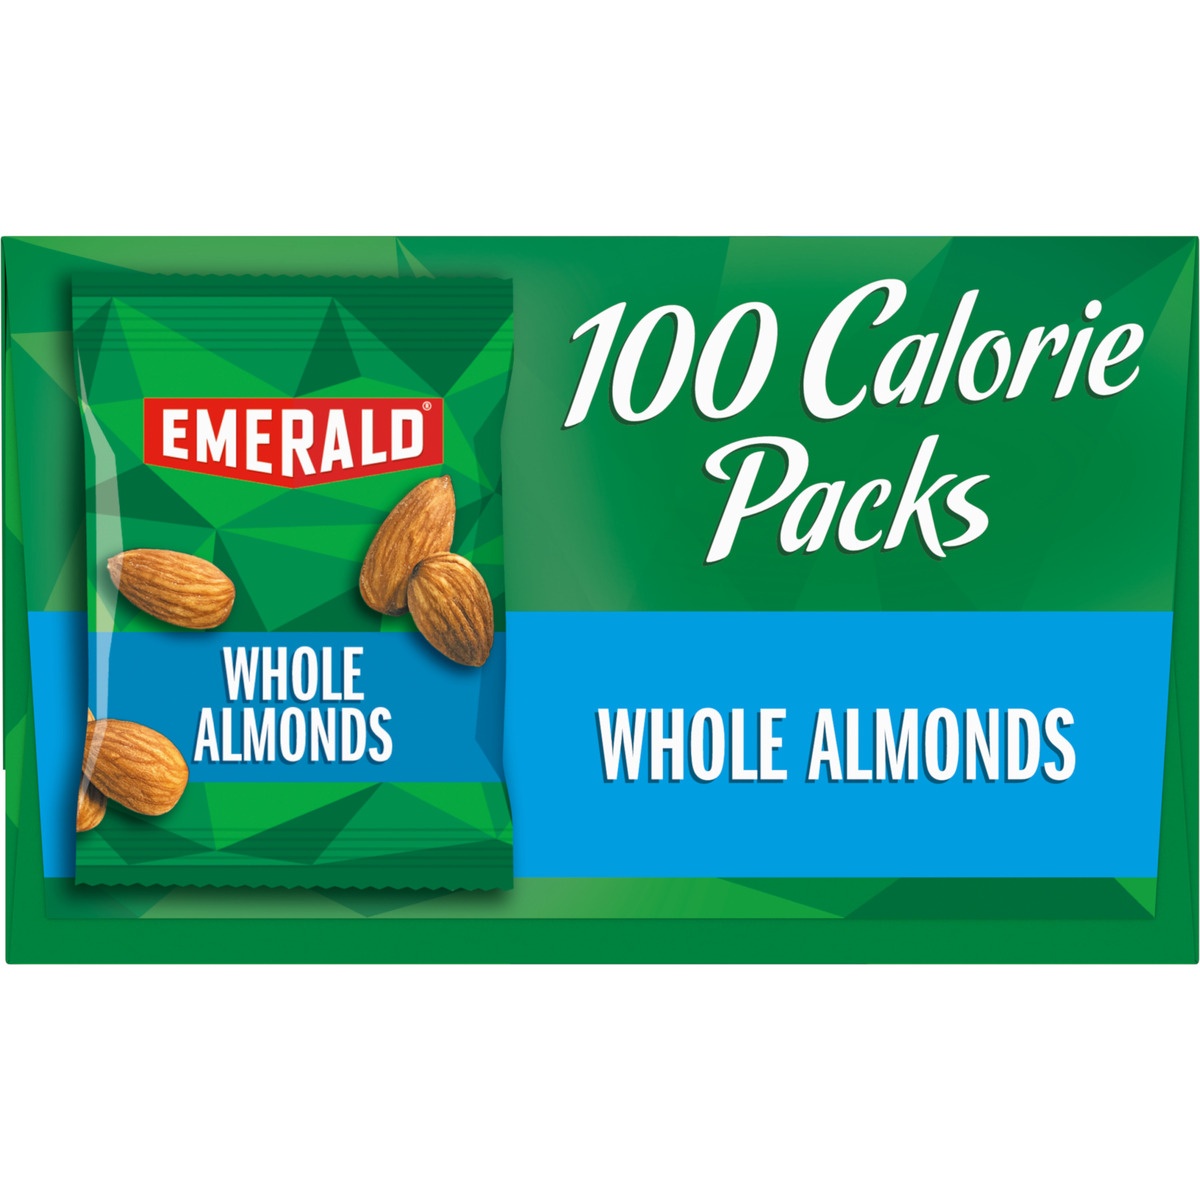 slide 6 of 11, Emerald Natural Almonds 100 Calorie Packs, 7 ct